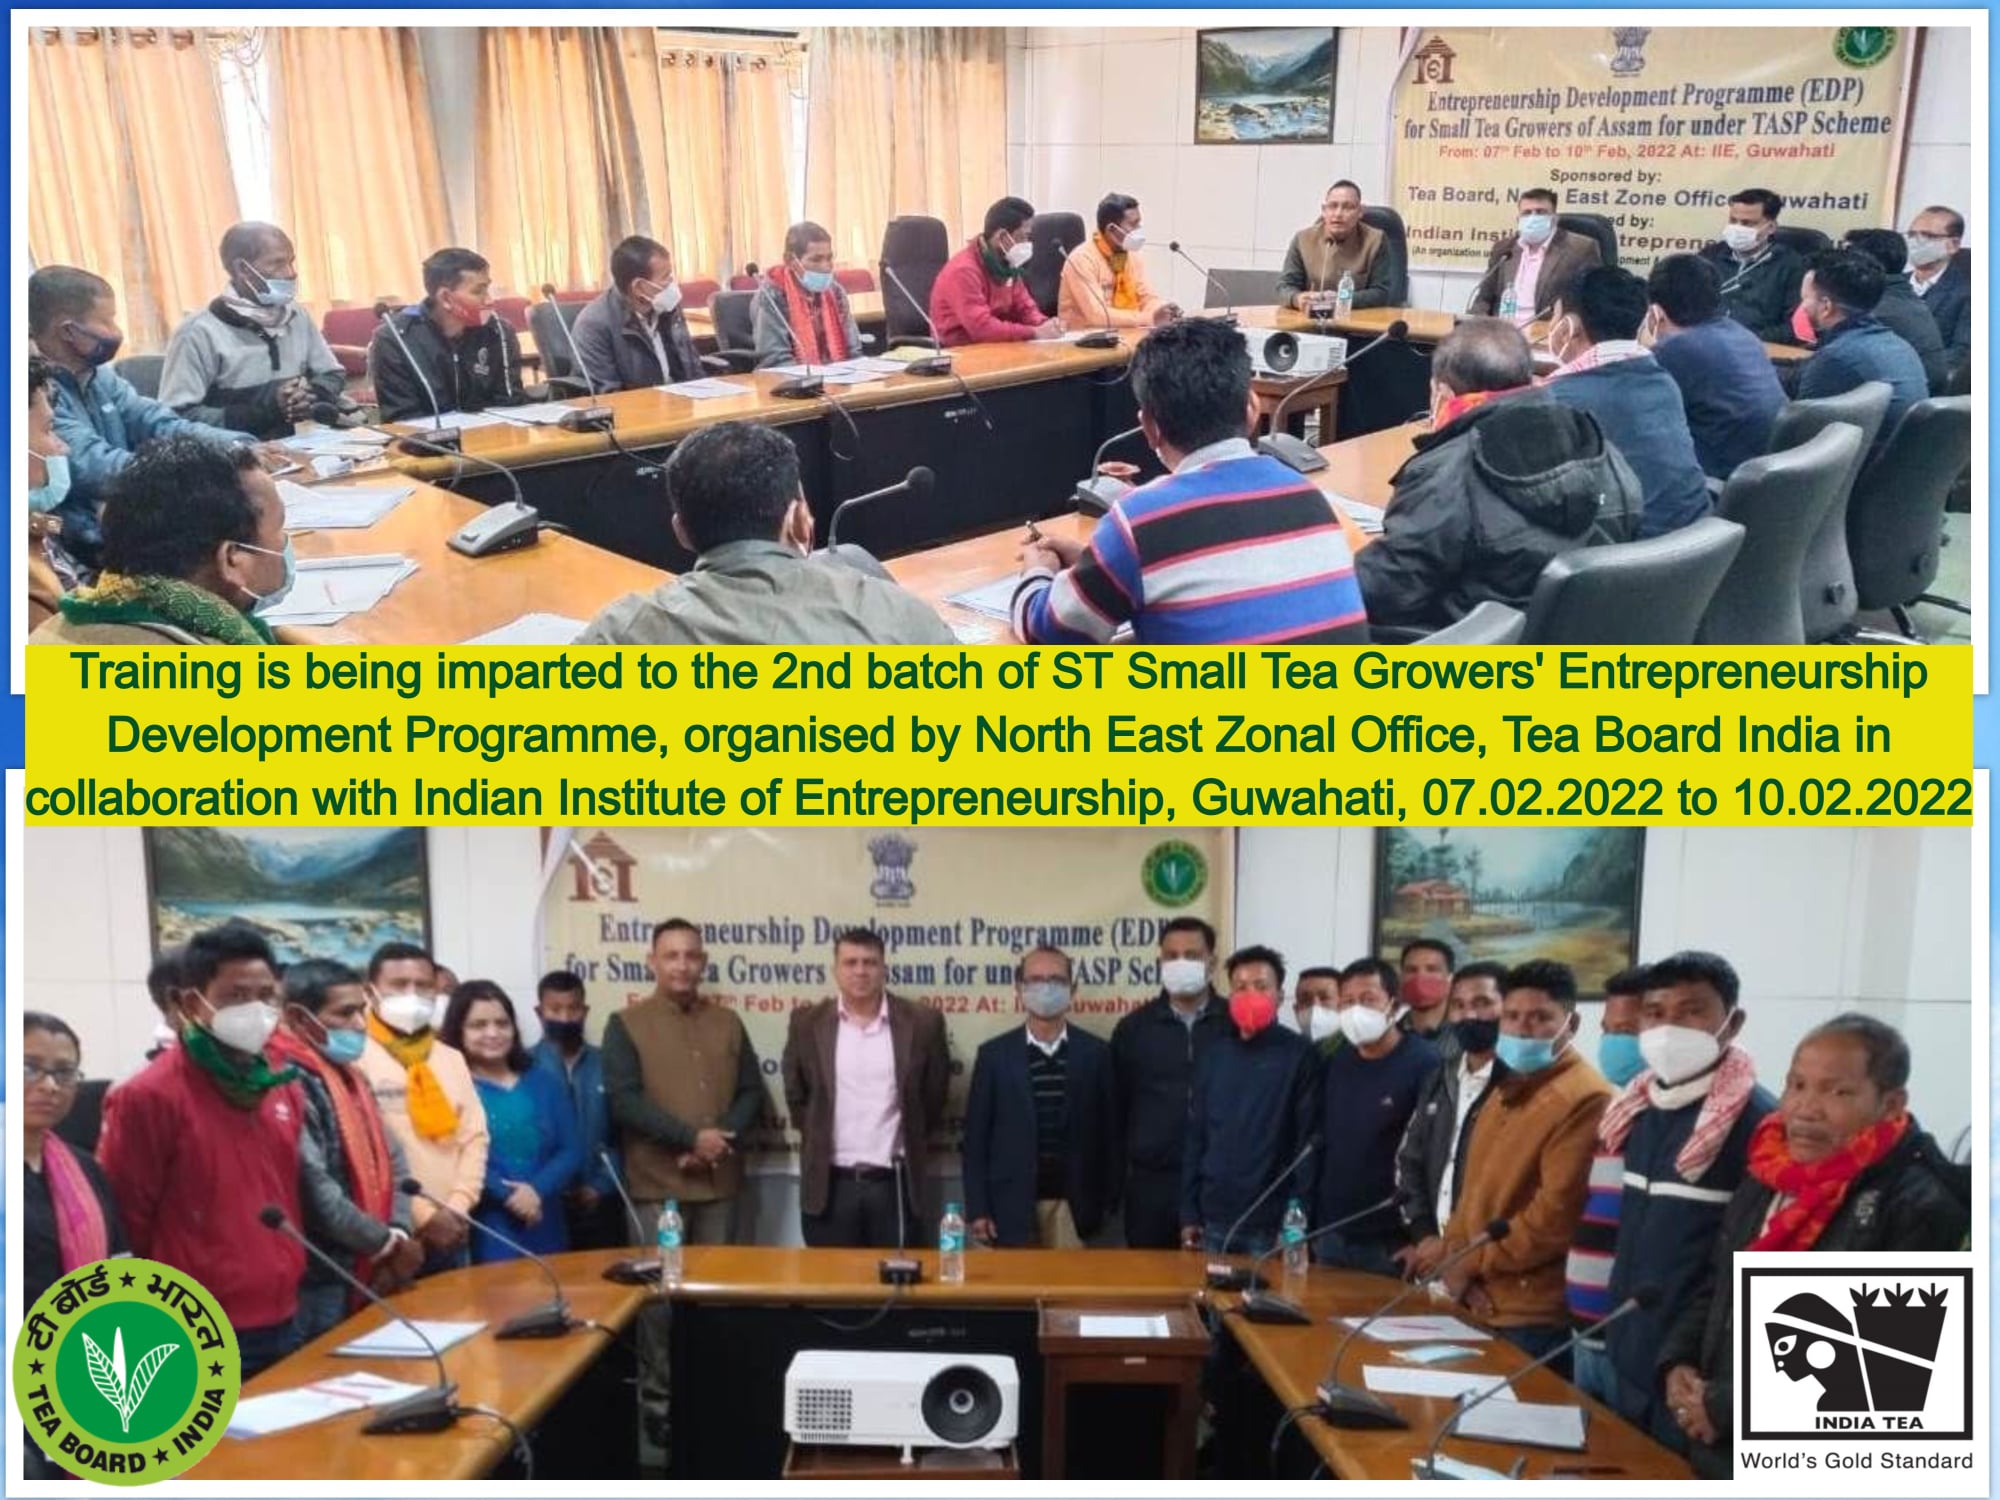 Training is being imparted to the 2nd batch of ST Small Tea Growers' Entrepreneurship Development Programme, organised by North East Zonal Office, Tea Board India, 7th February to 10th February 2022